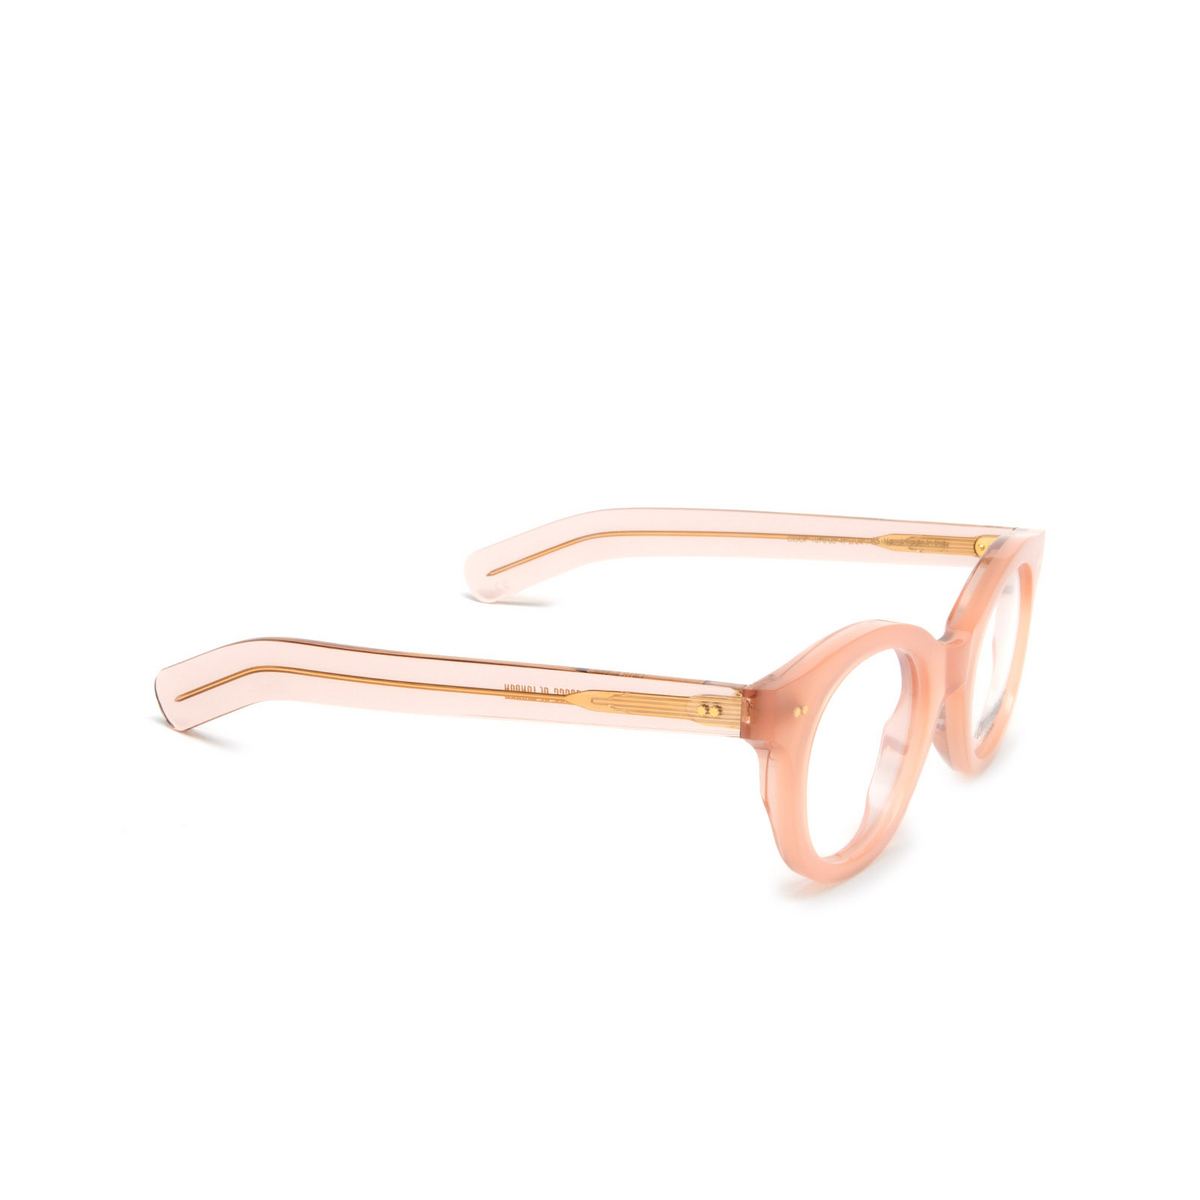 Cutler and Gross 1390 Eyeglasses 03 Papa Dont Peach - three-quarters view